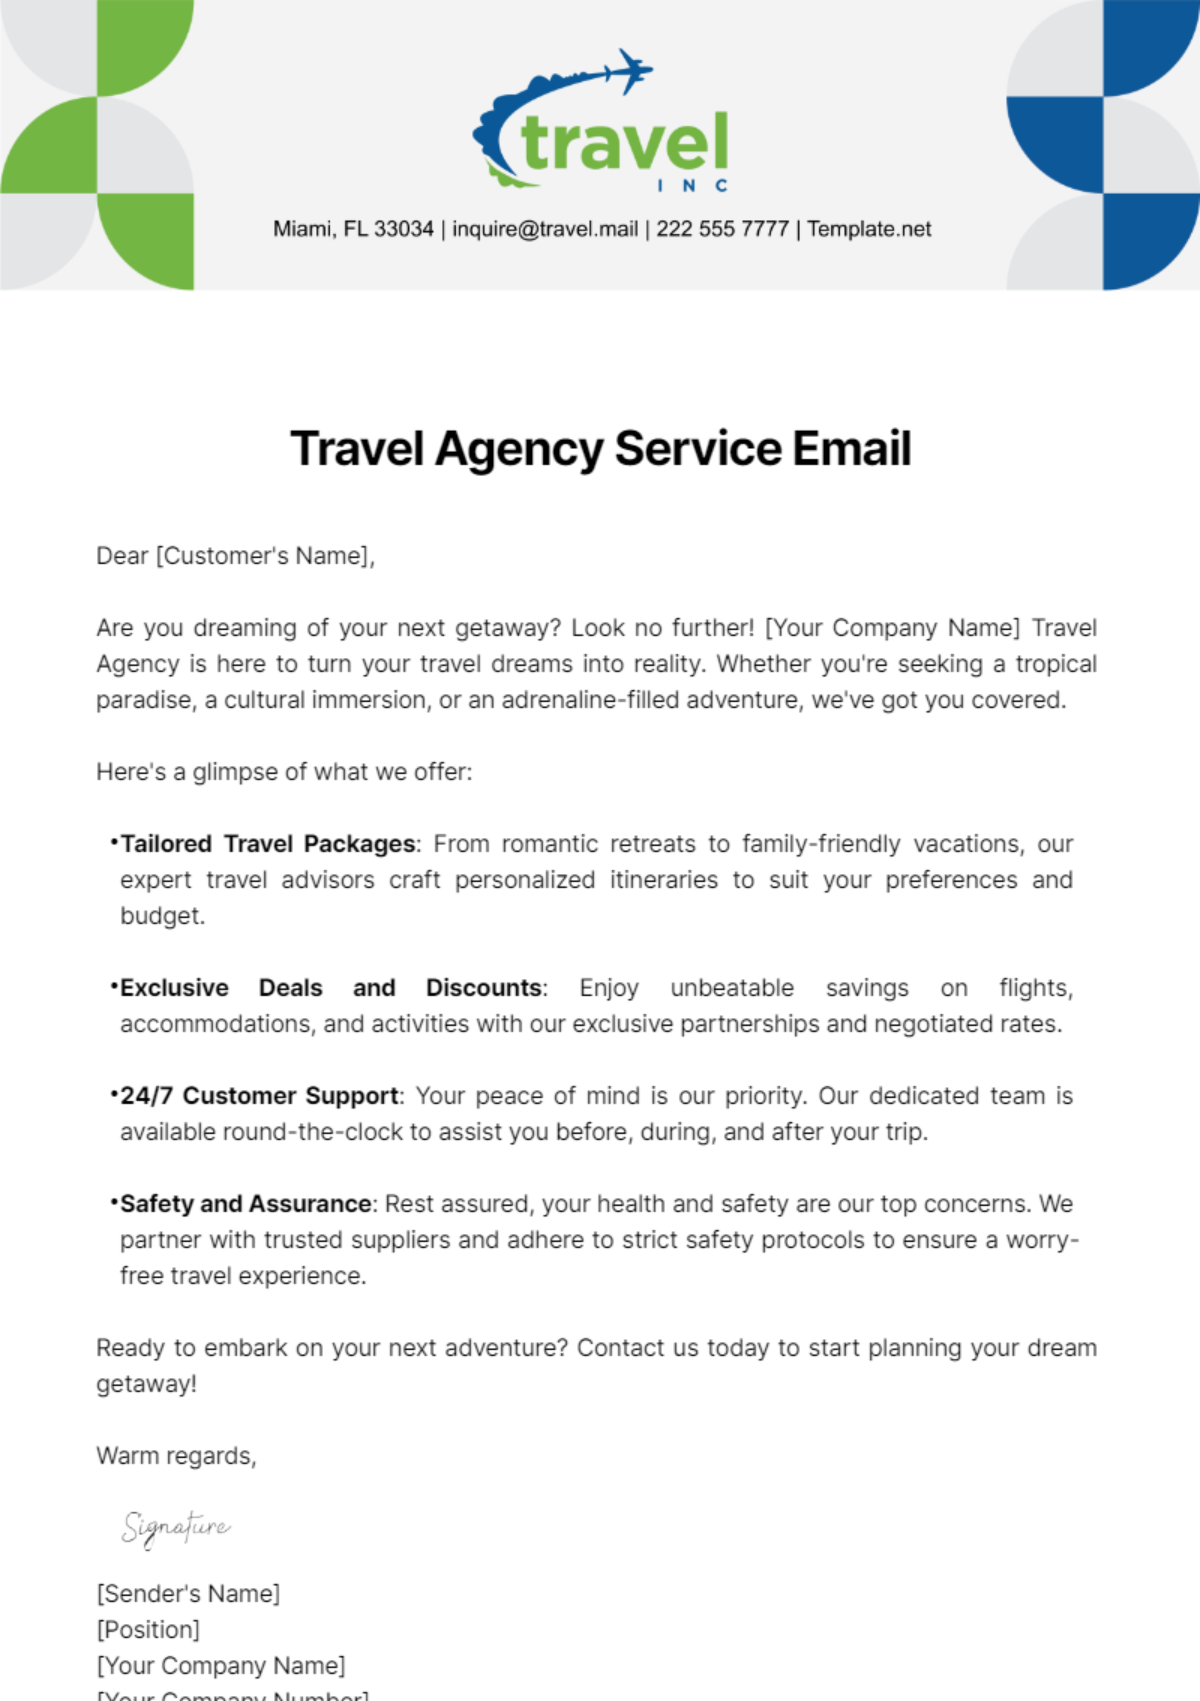 Free Travel Agency Service Email Template